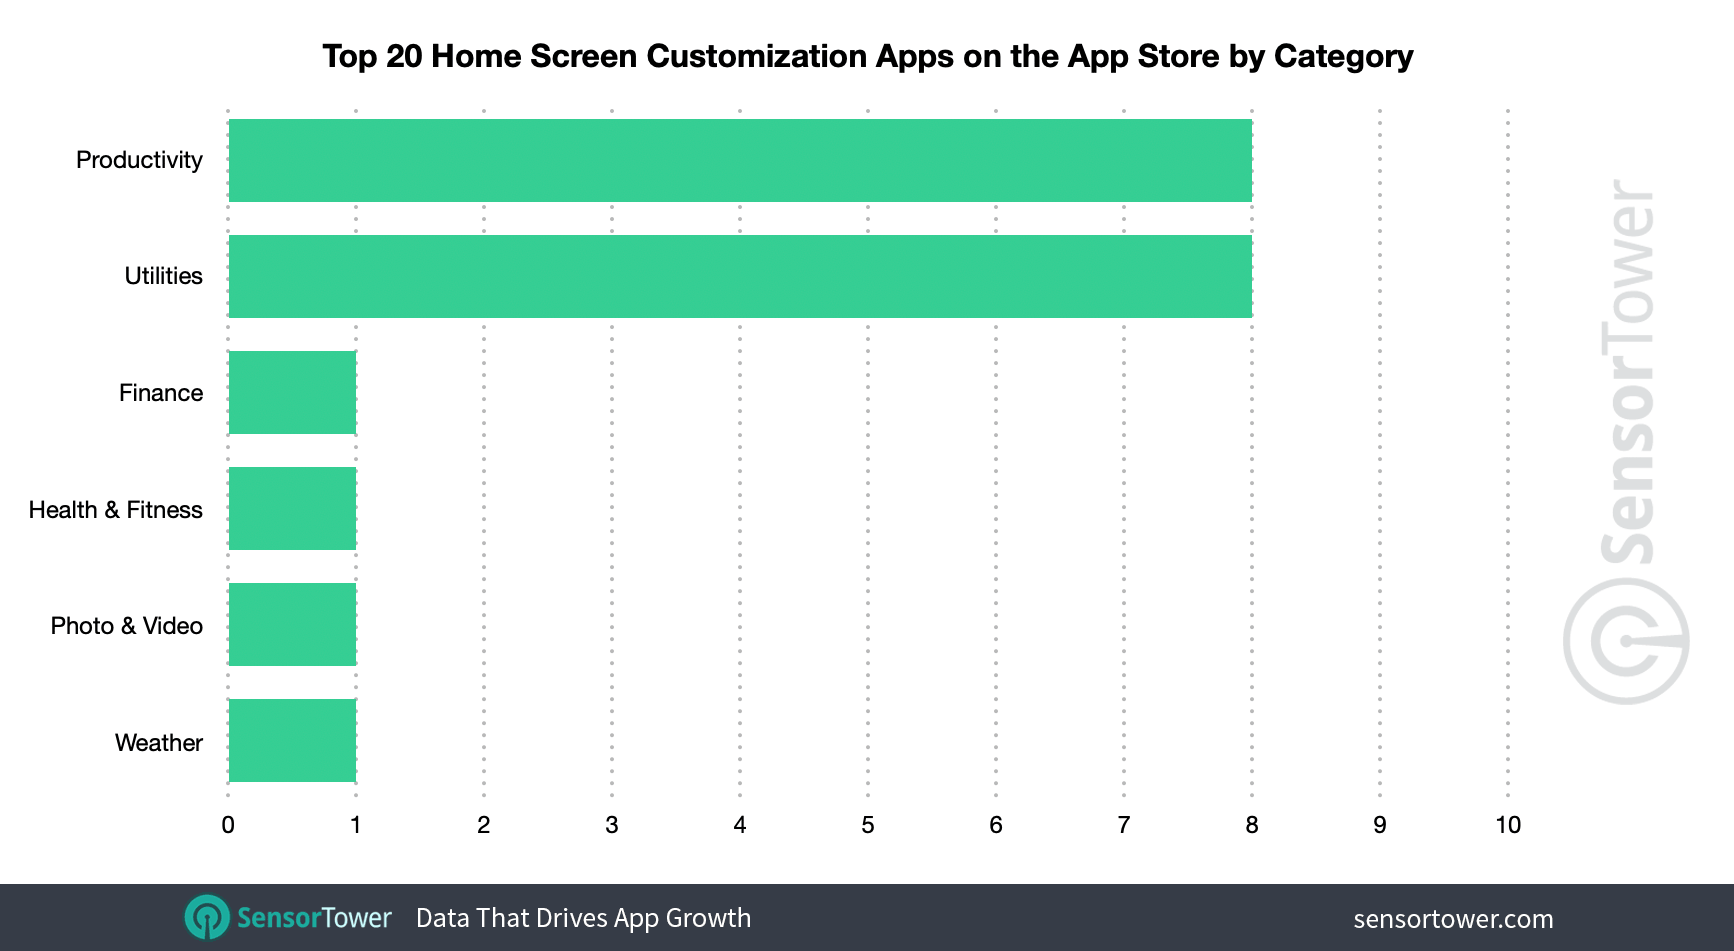 Utilities and Productivity were the most common categories among the top 20 home screen customization apps